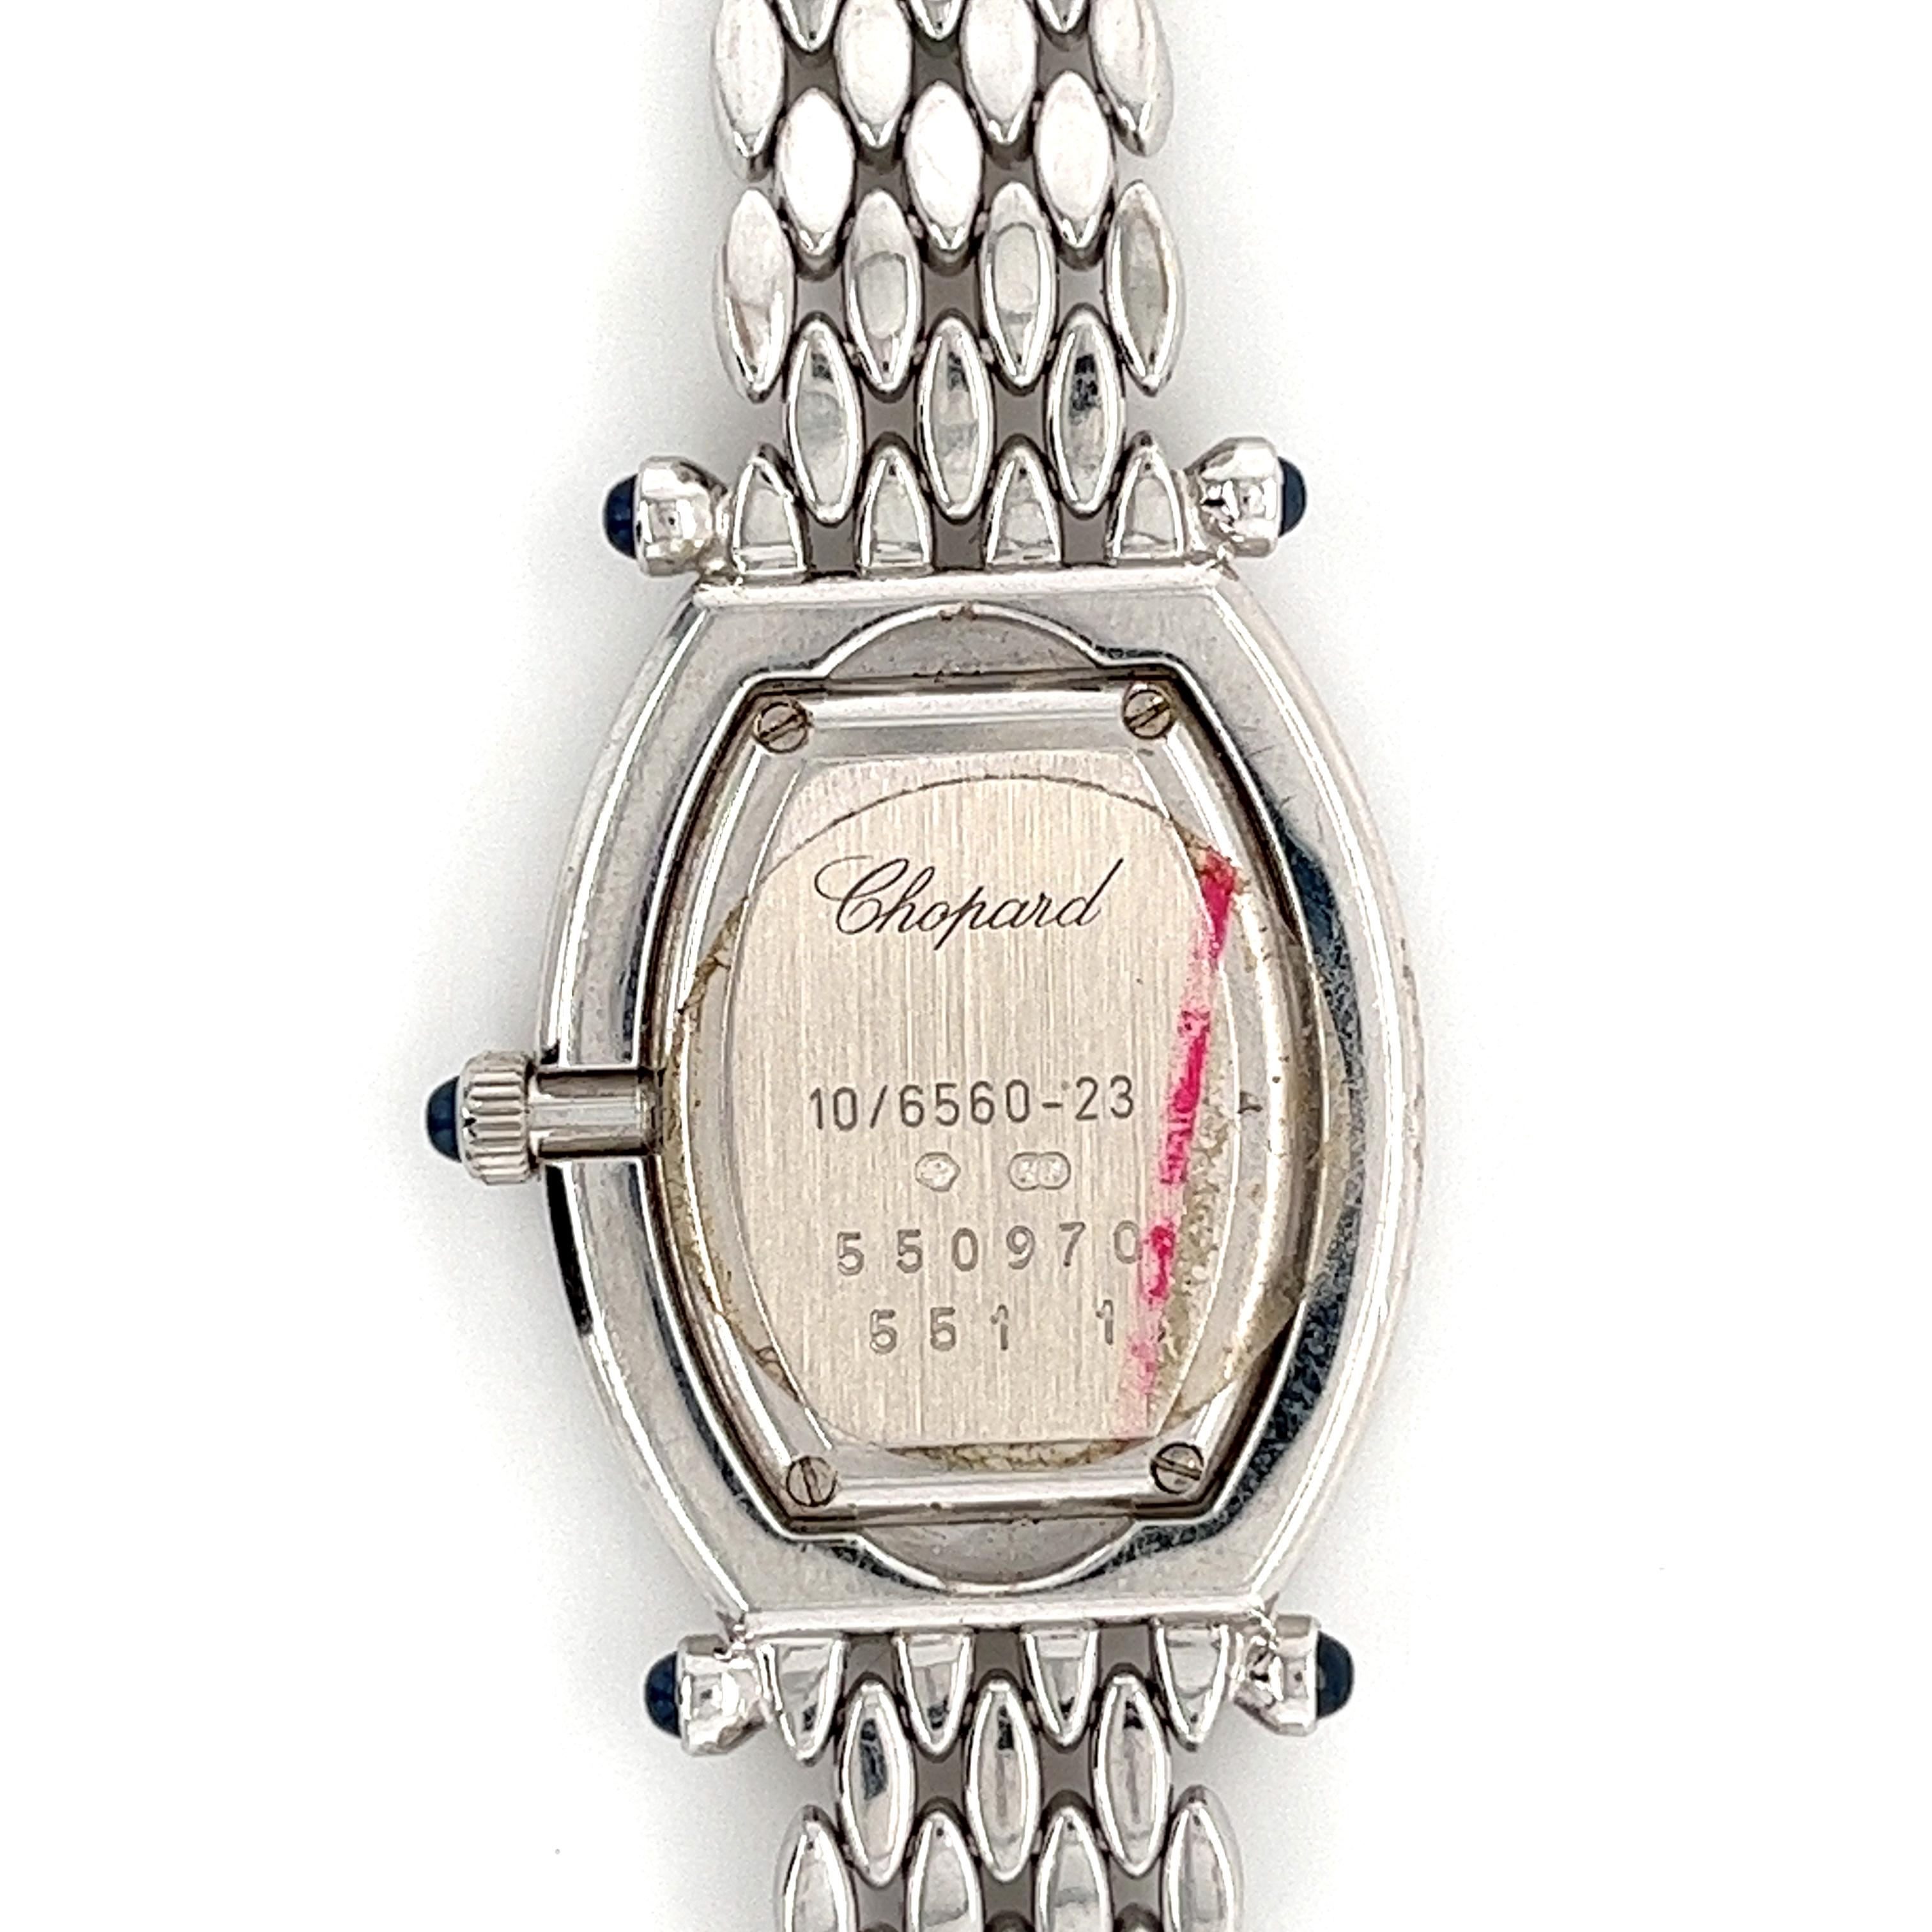 Ladies Chopard Classic 10/6560-23W in 18k white gold with double row pave diamond bezel & case. Quartz movement. Ref 10/6560-23W. This Chopard watch has a Tonneau-shaped, 24mm, case and a white Roman Numeral dial. All of the diamonds are original